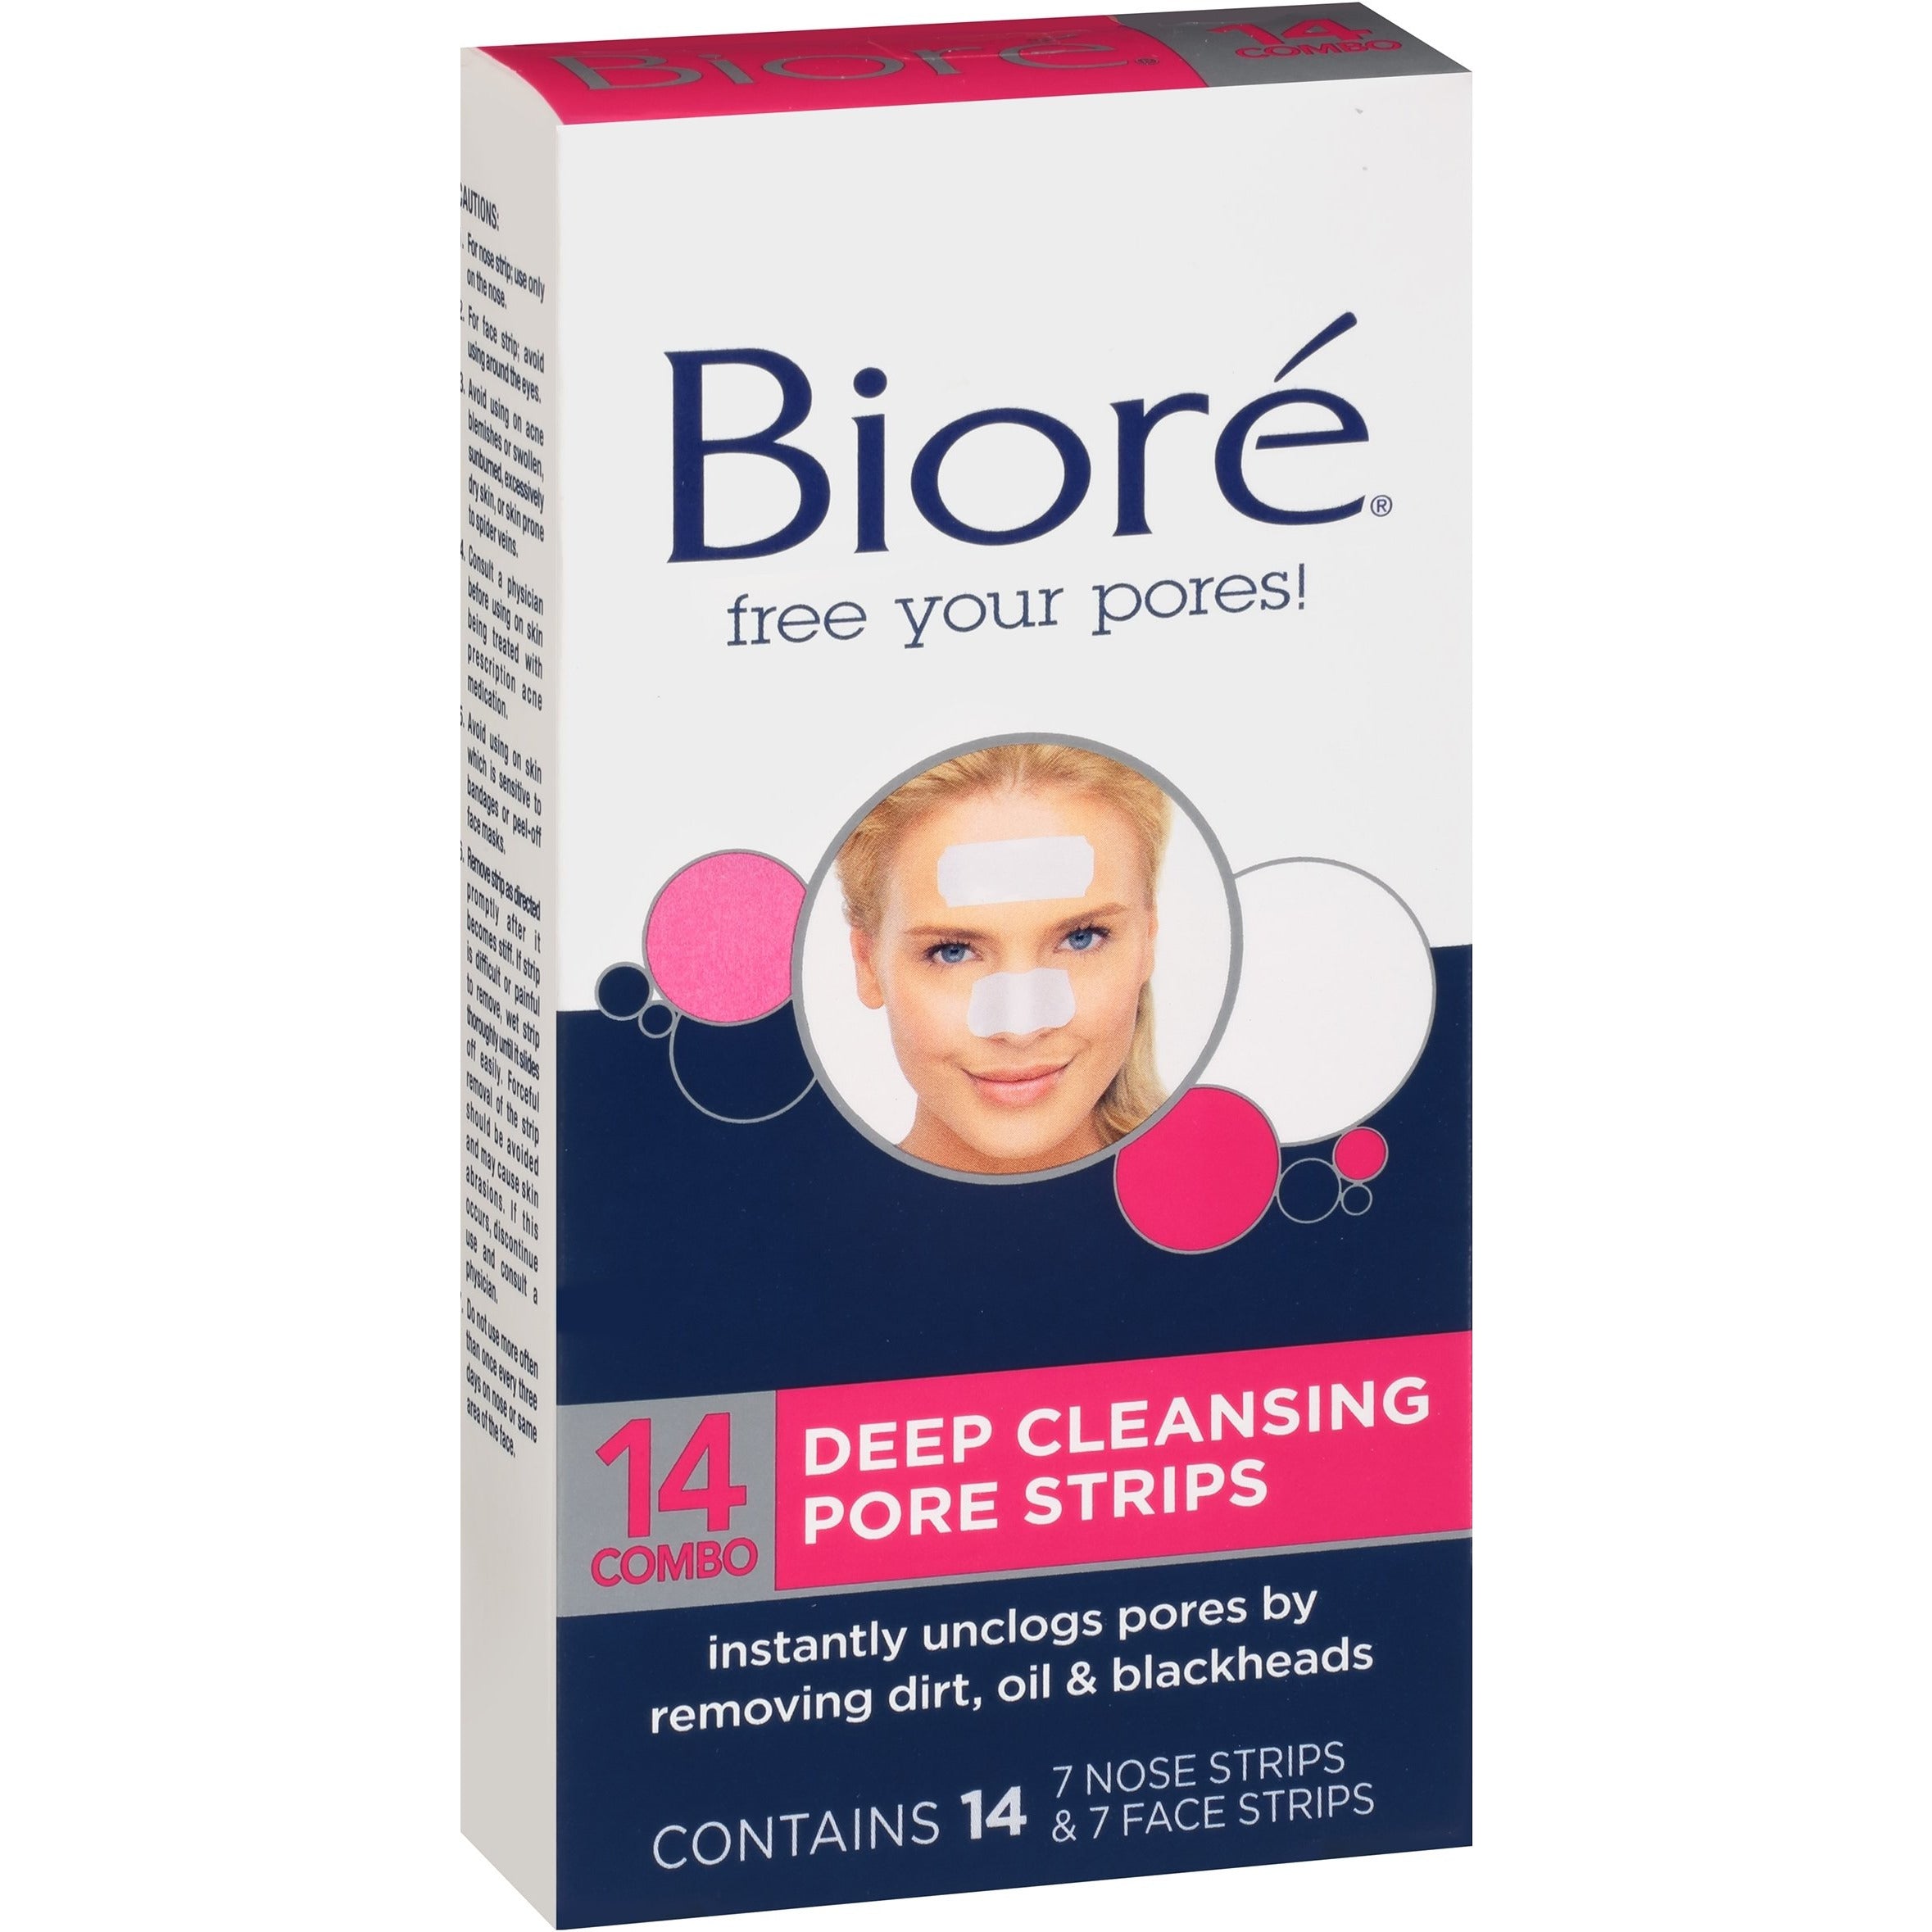 4th Ave Market: Biore Deep Cleansing Pre Strips, 14 Count